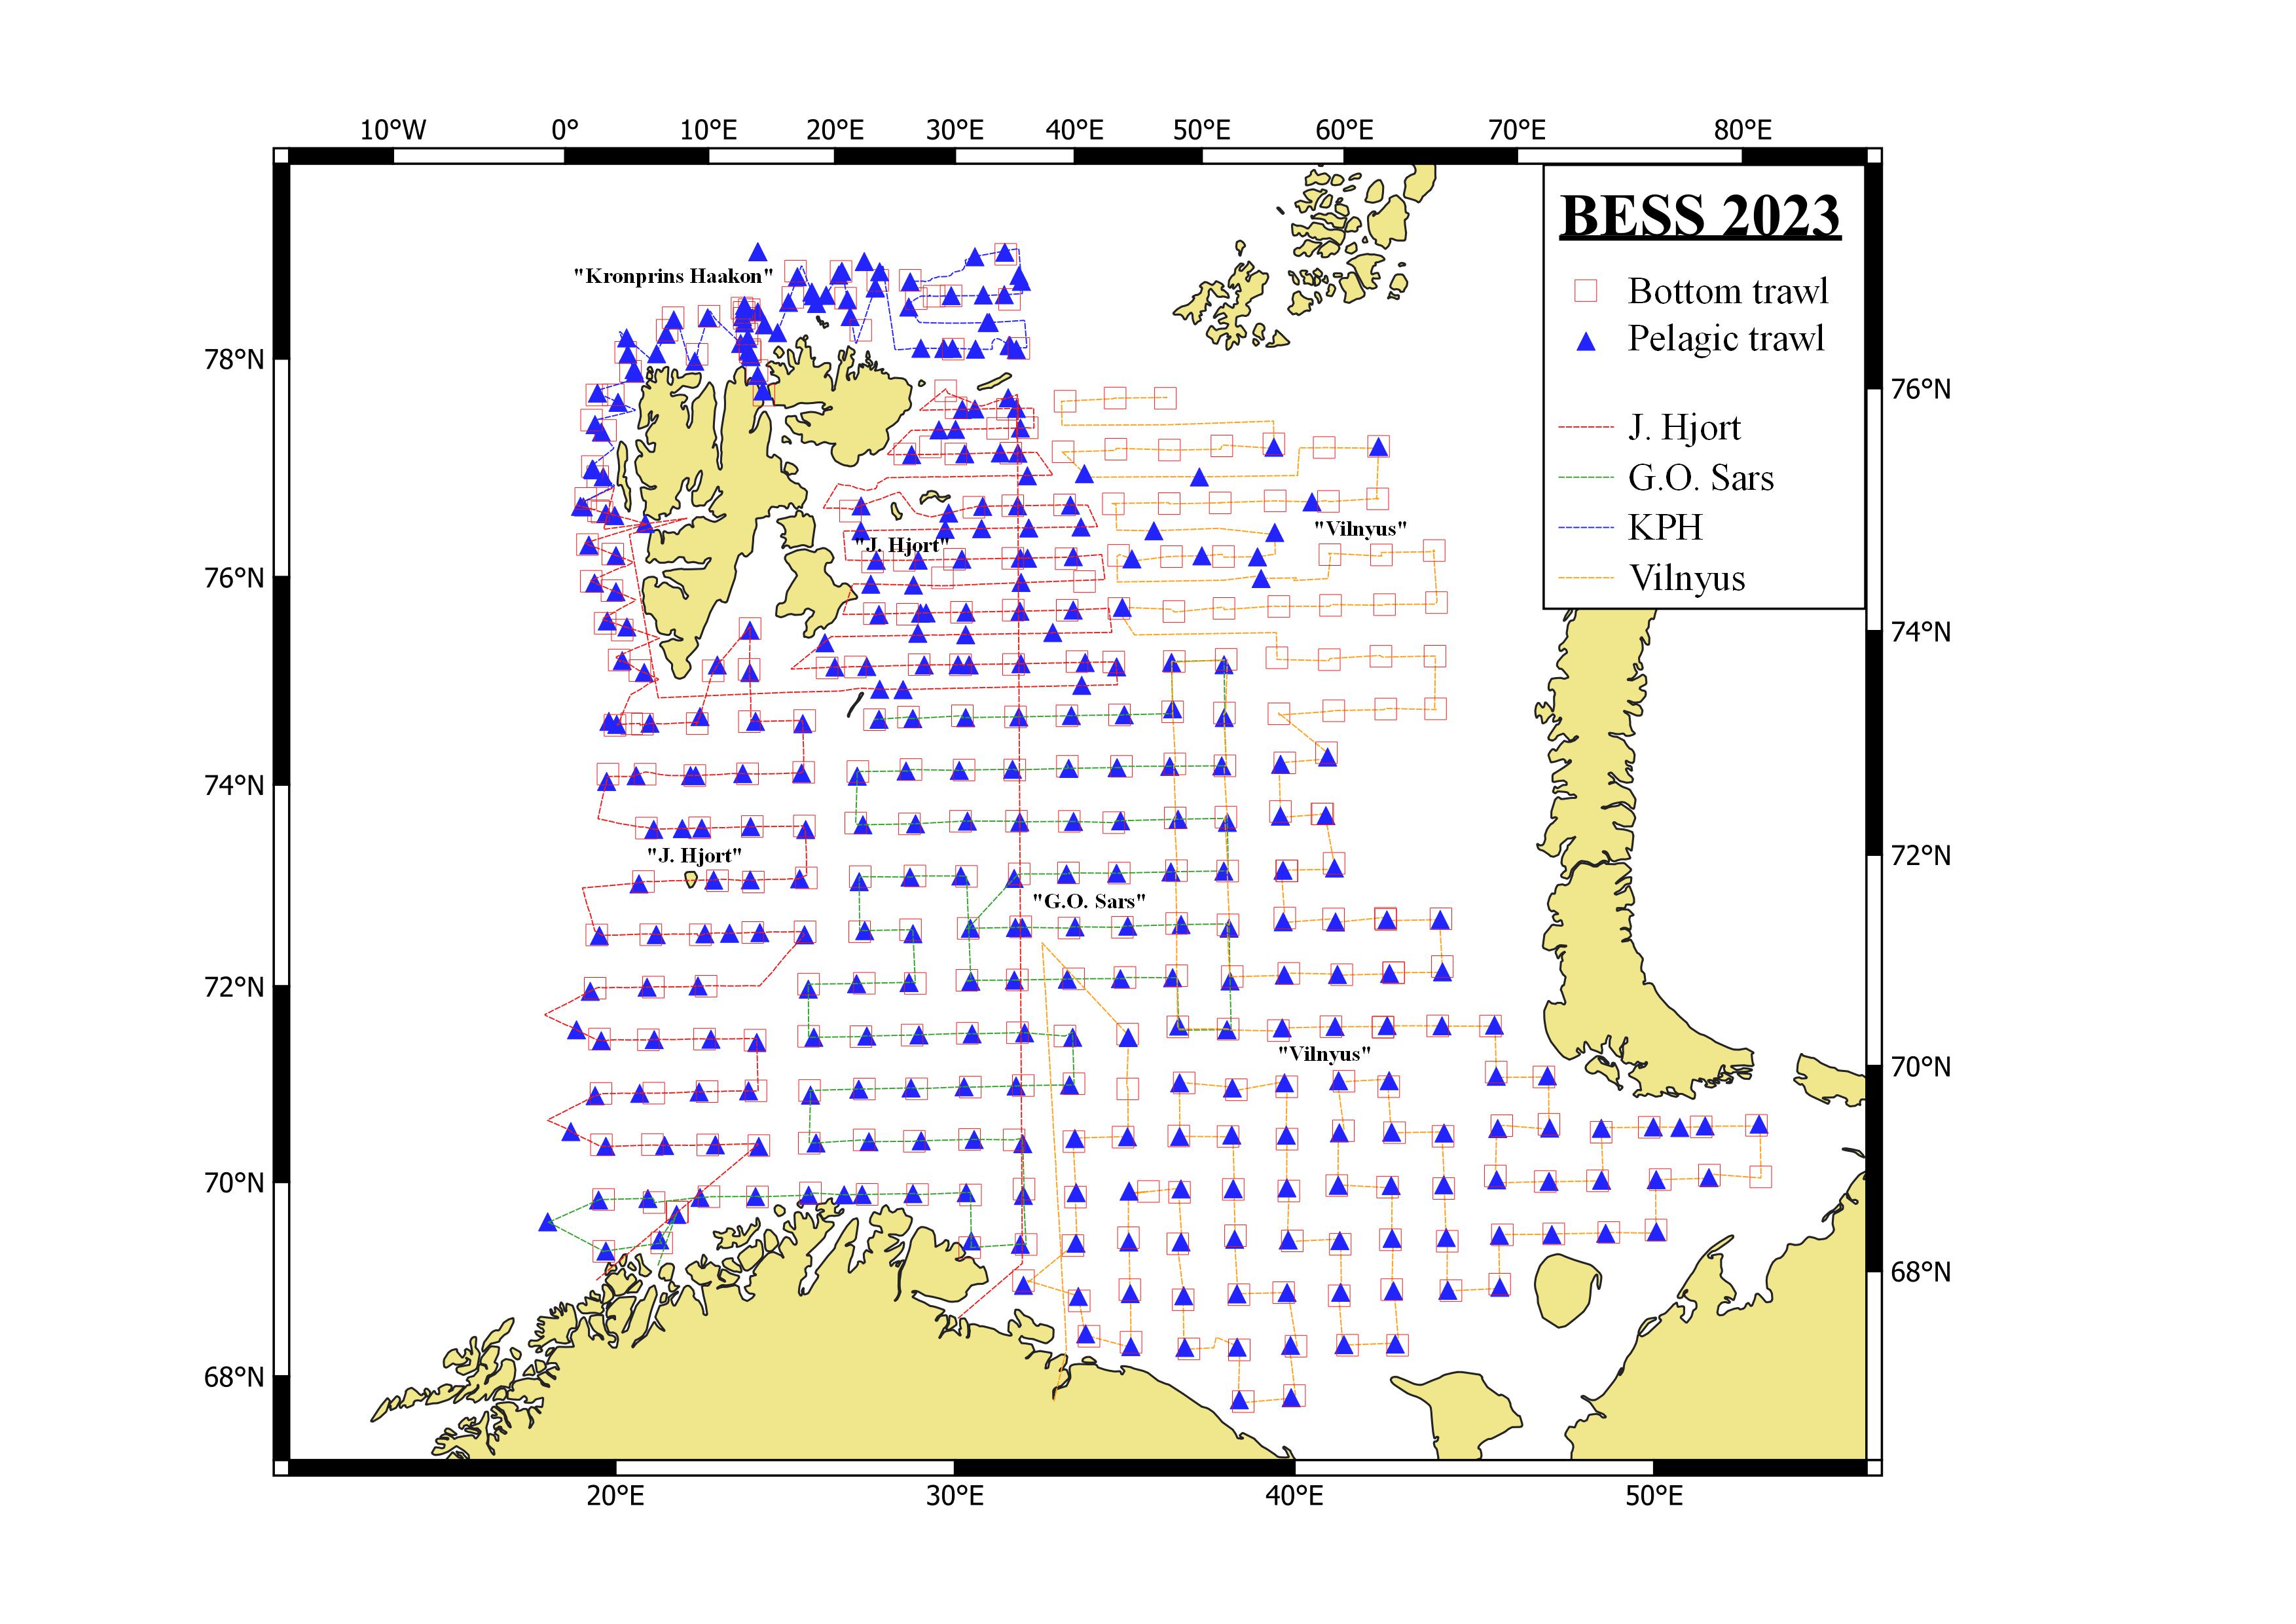 Figure 2.2. BESS 2023, realized vessel tracks with pelagic and bottom trawl sampling stations, note that some trawl stations are taken in addition to the regular ecosystem stations.